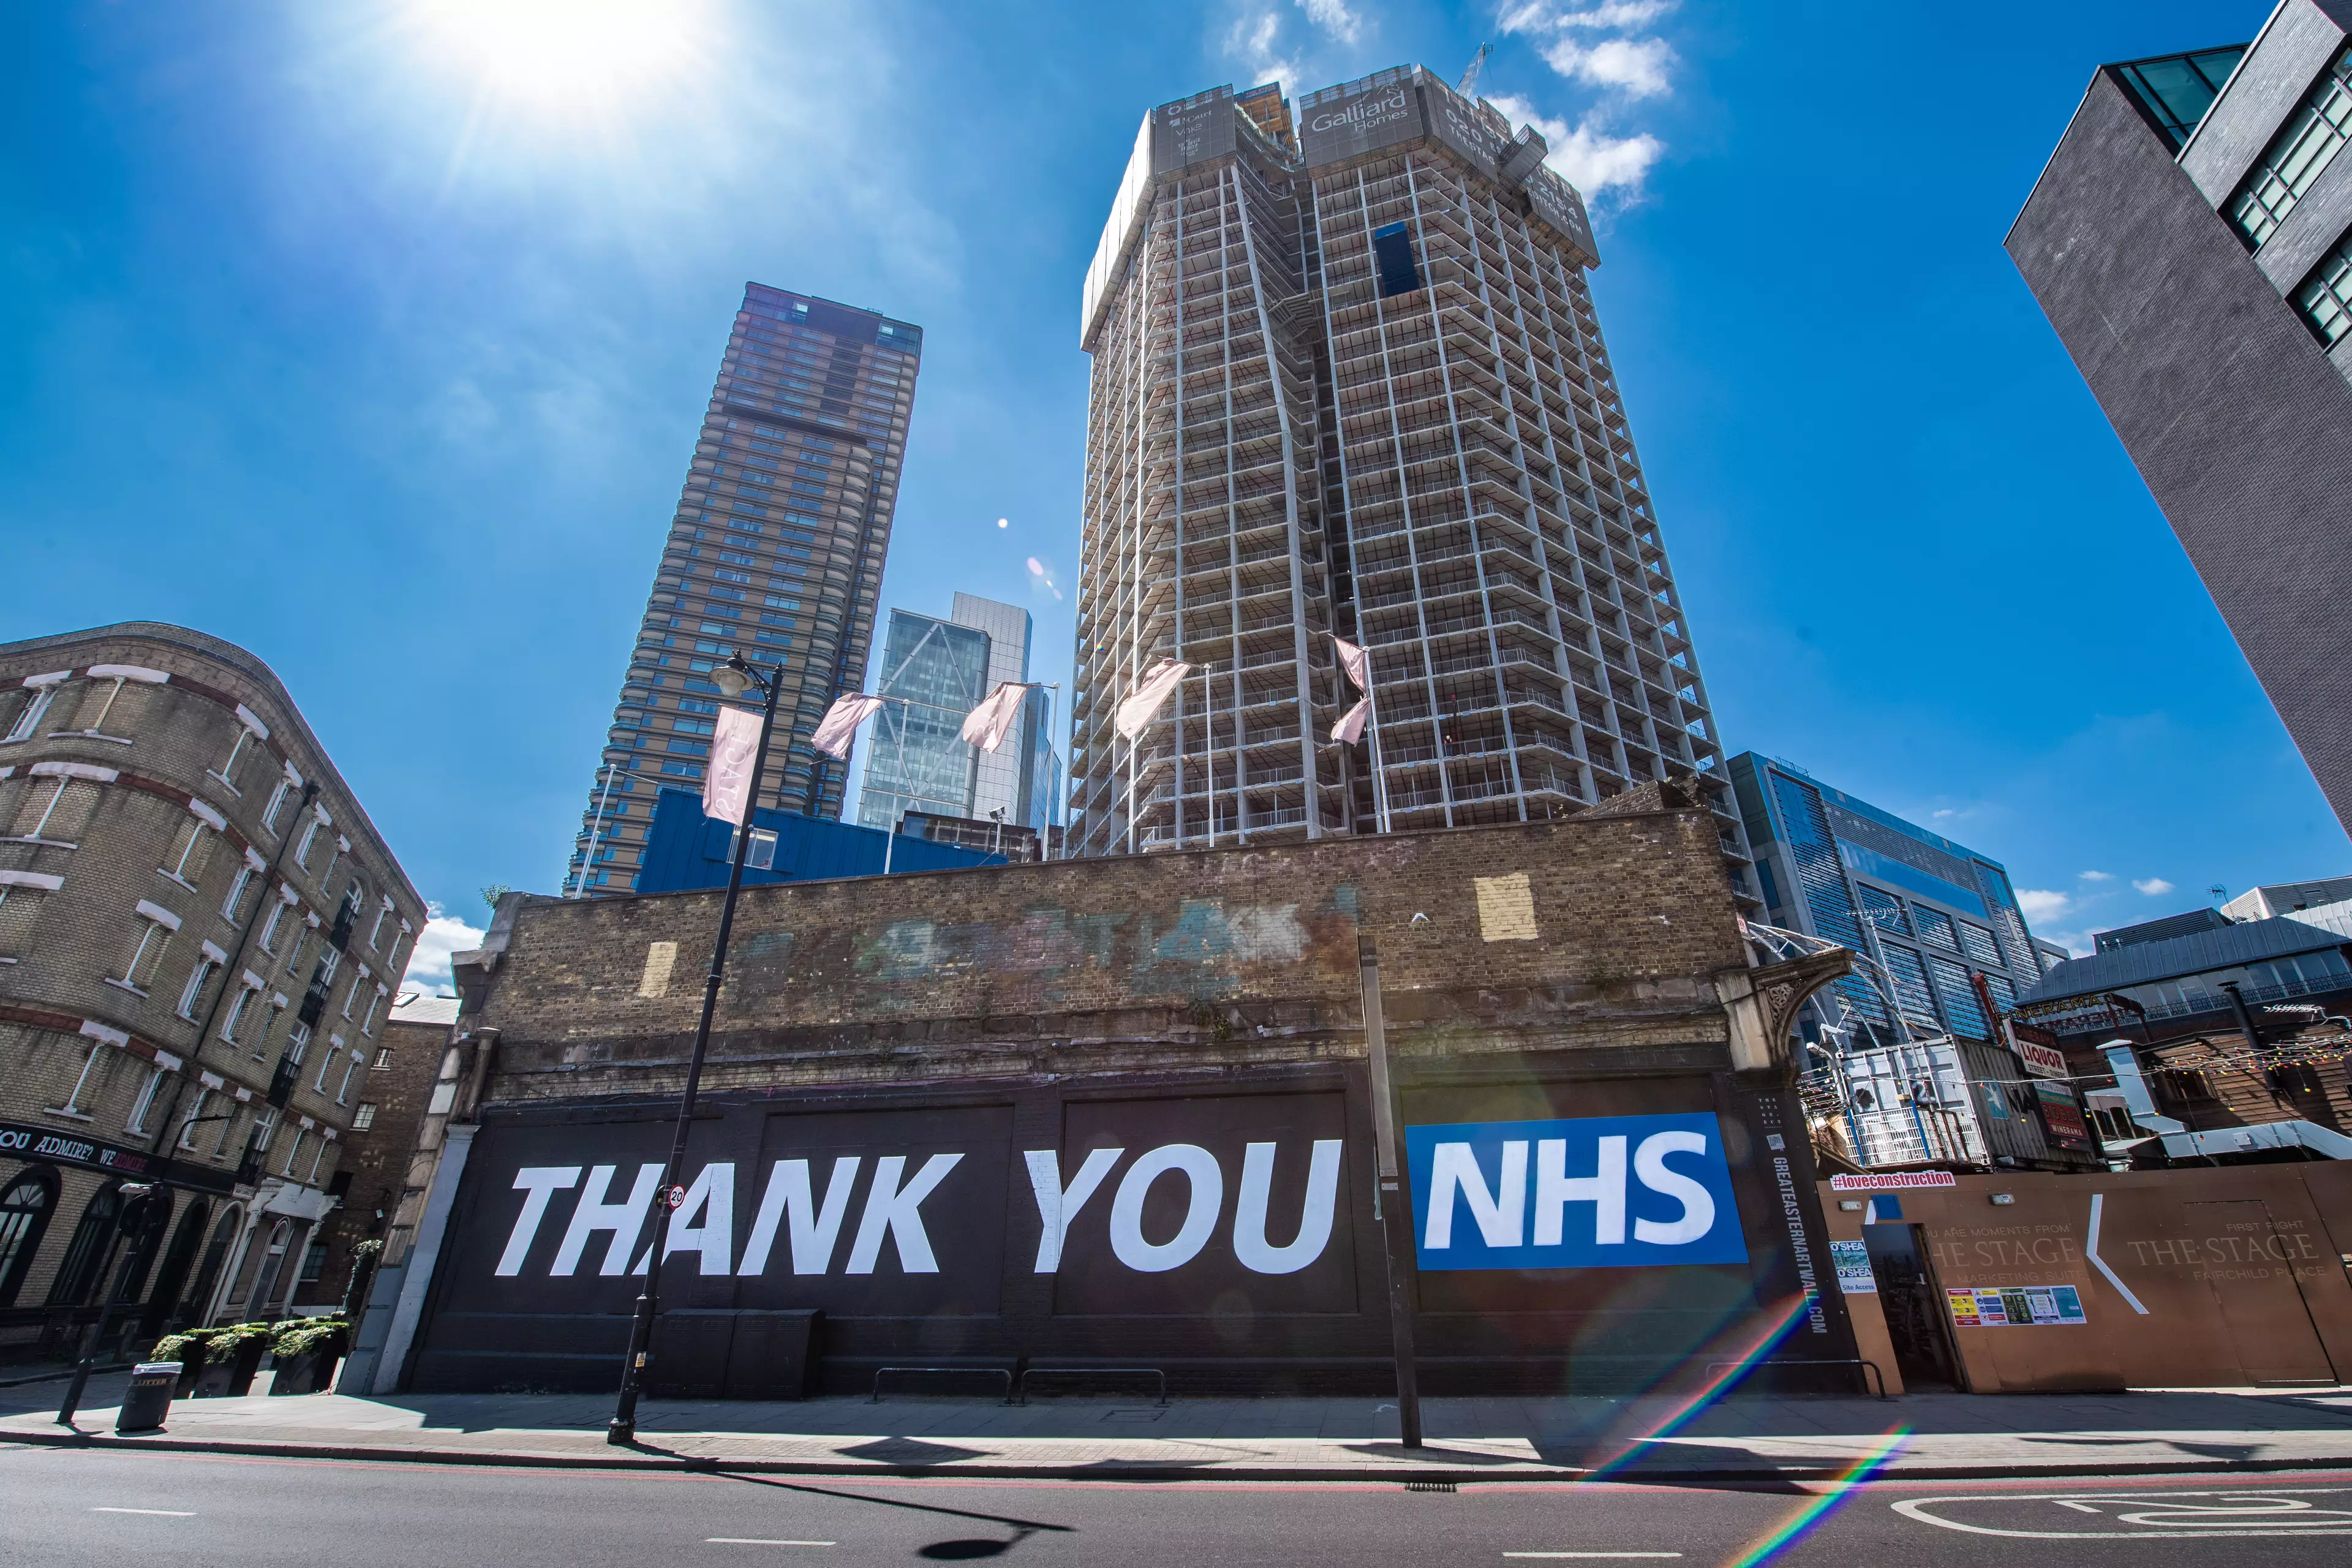 Street art thanking the NHS for their efforts.